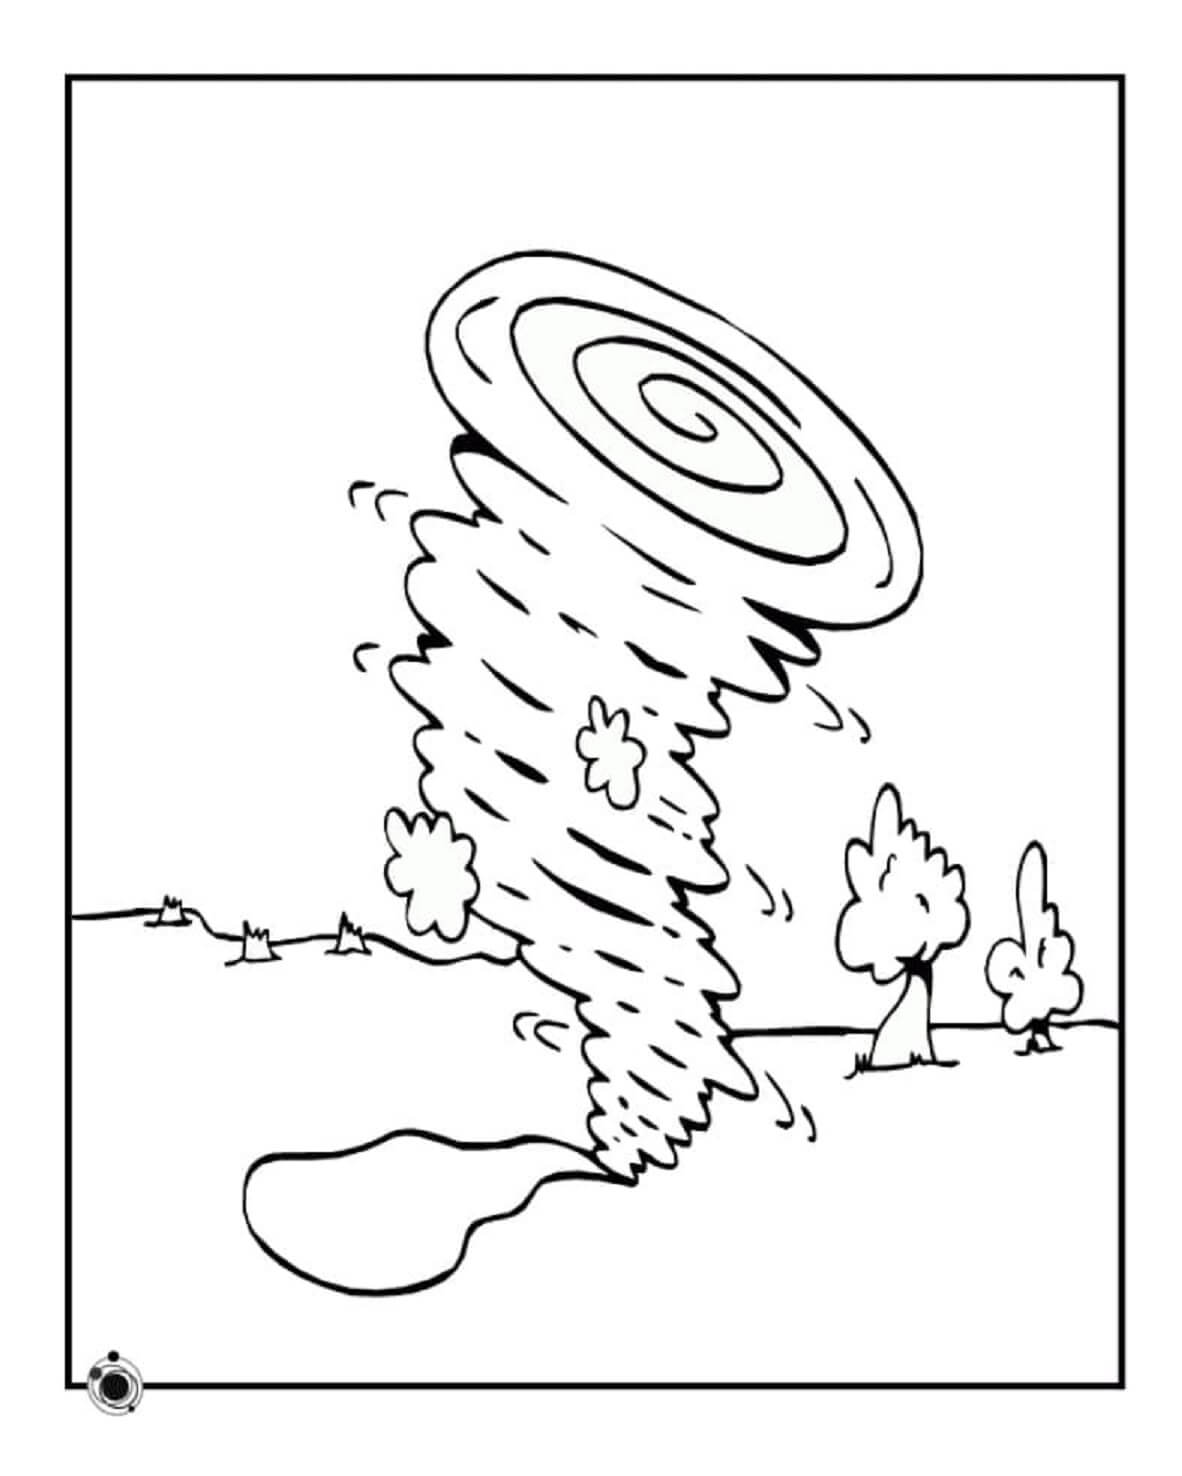 Petite Tornade coloring page